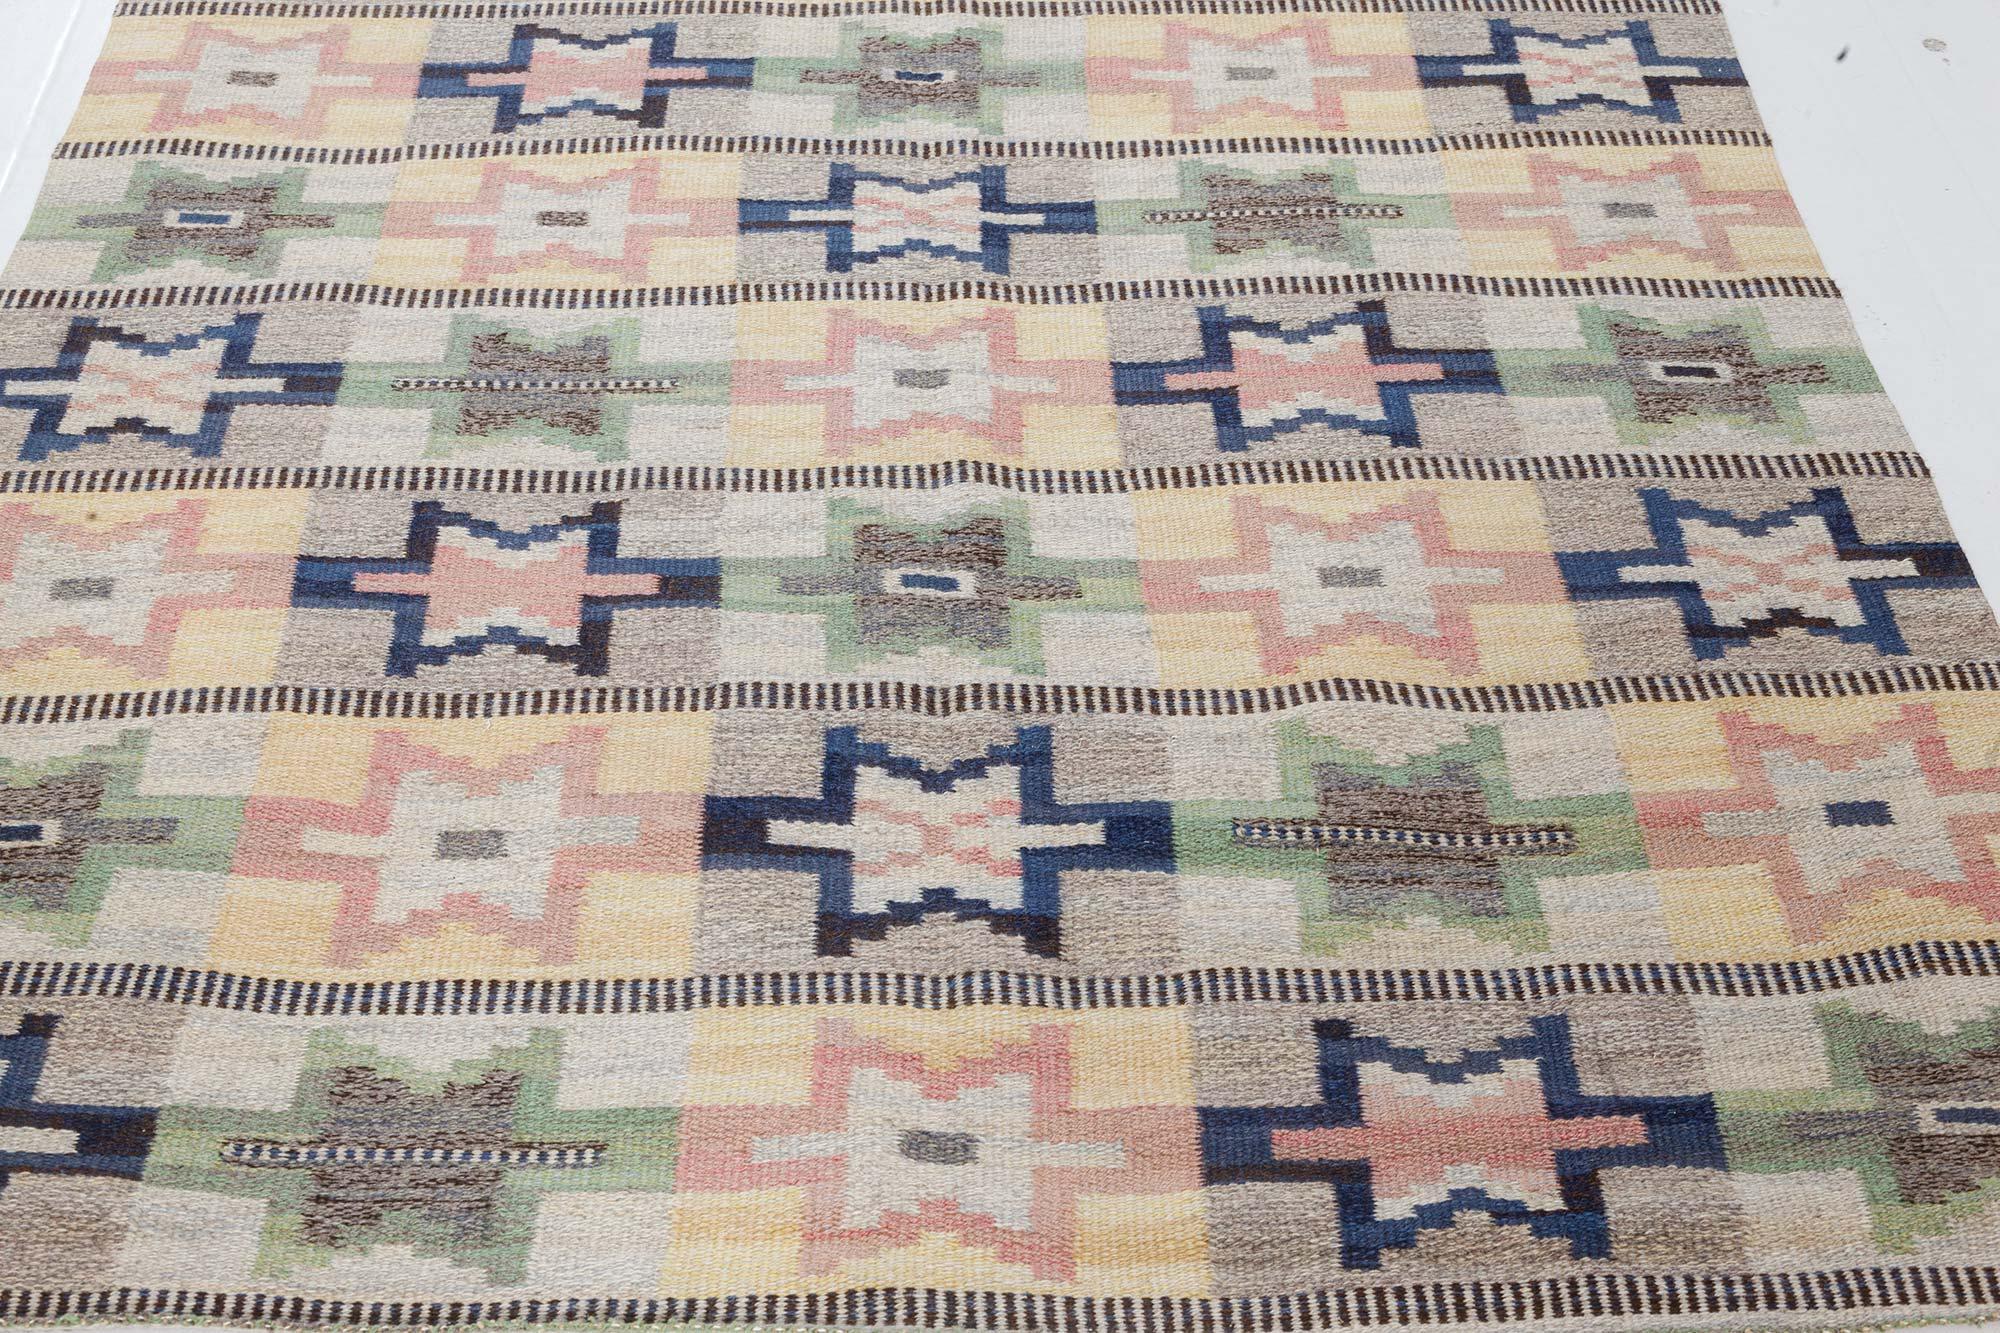 Hand-Knotted Mid-20th Century Swedish Green, Pink, Amber, Blue, Gray Flat-Weave Wool Rug